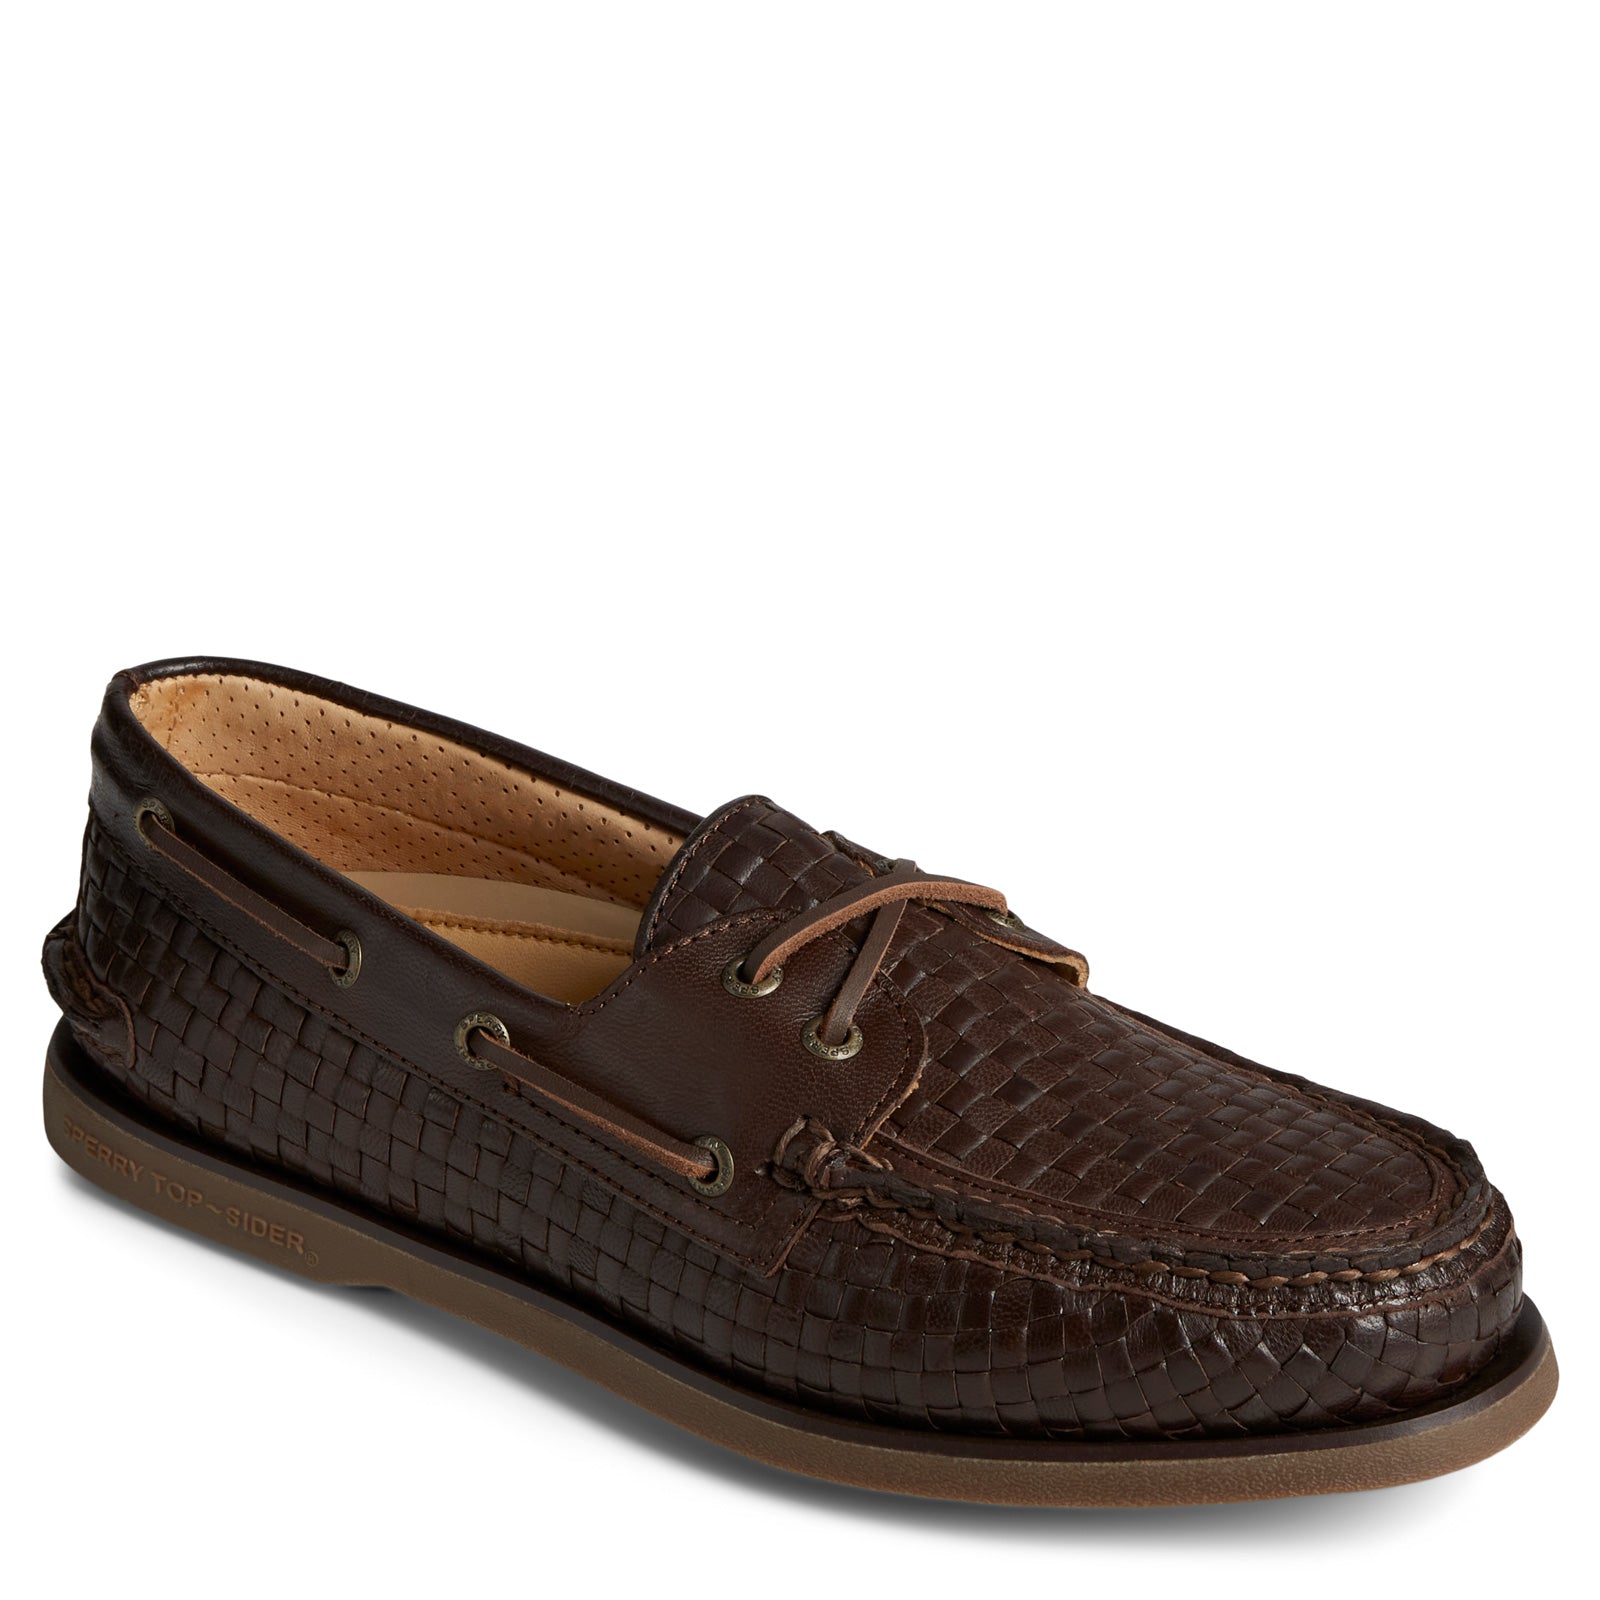 Sperry Top-Sider Authentic Original Boat Shoe Men Classic Brown